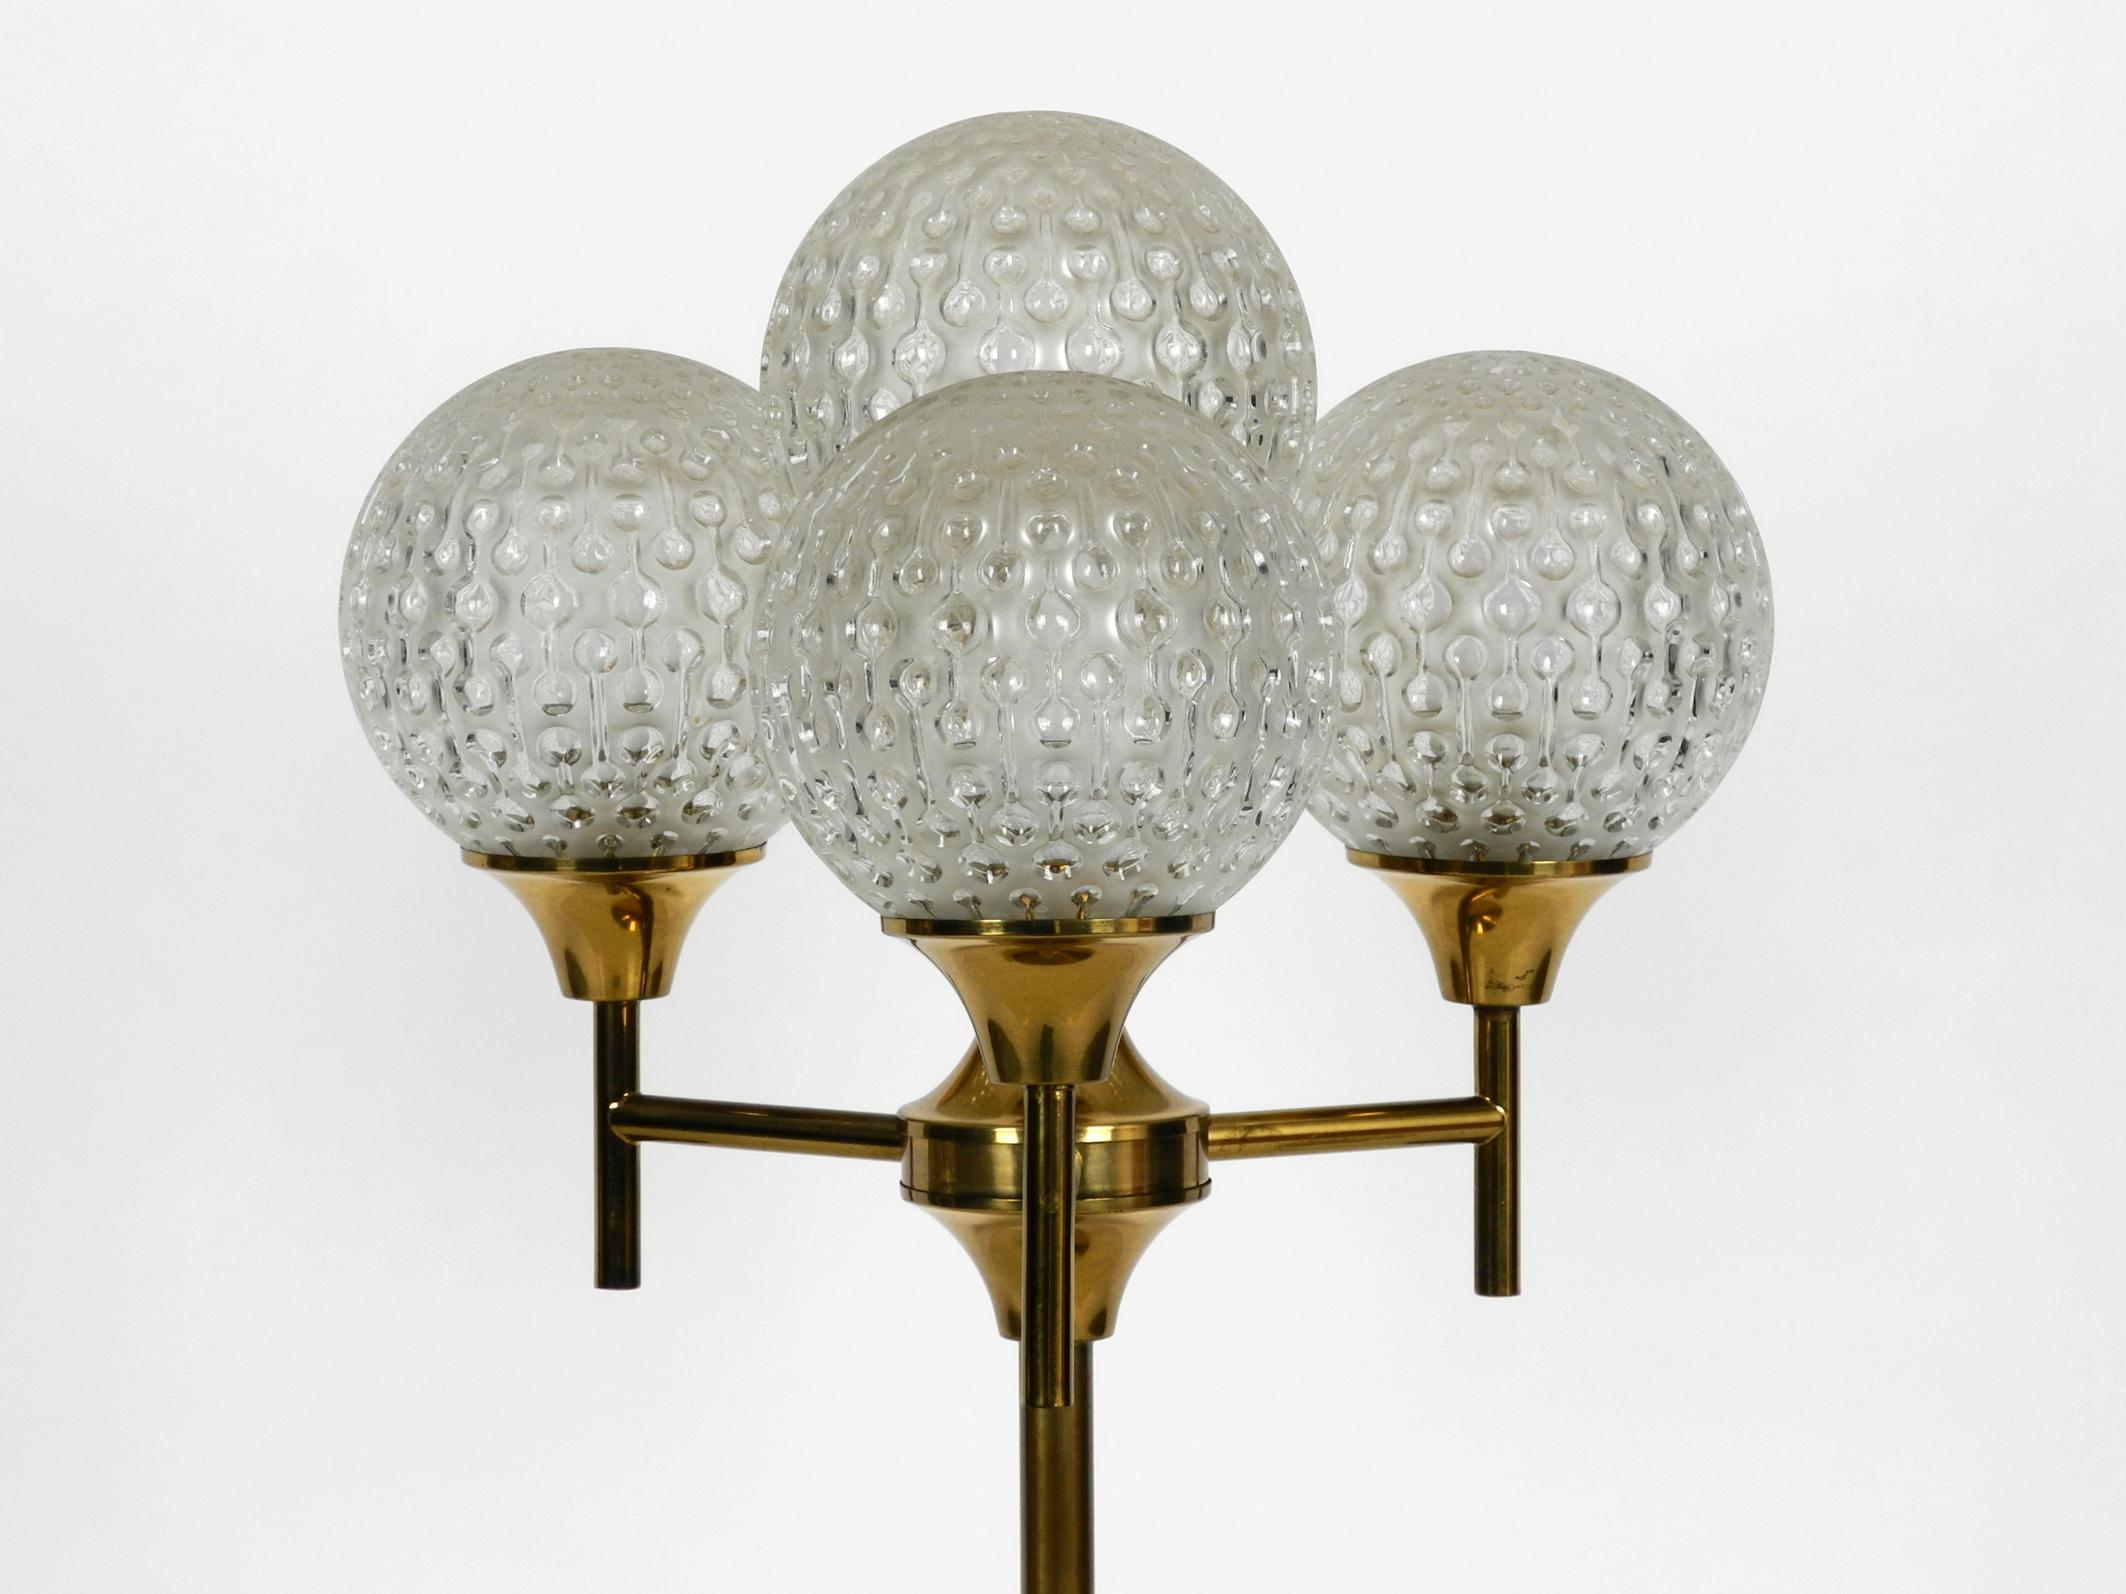 German Exceptional Large 1960s Full Brass Table or Floor Lamp with 4 Glass Balls